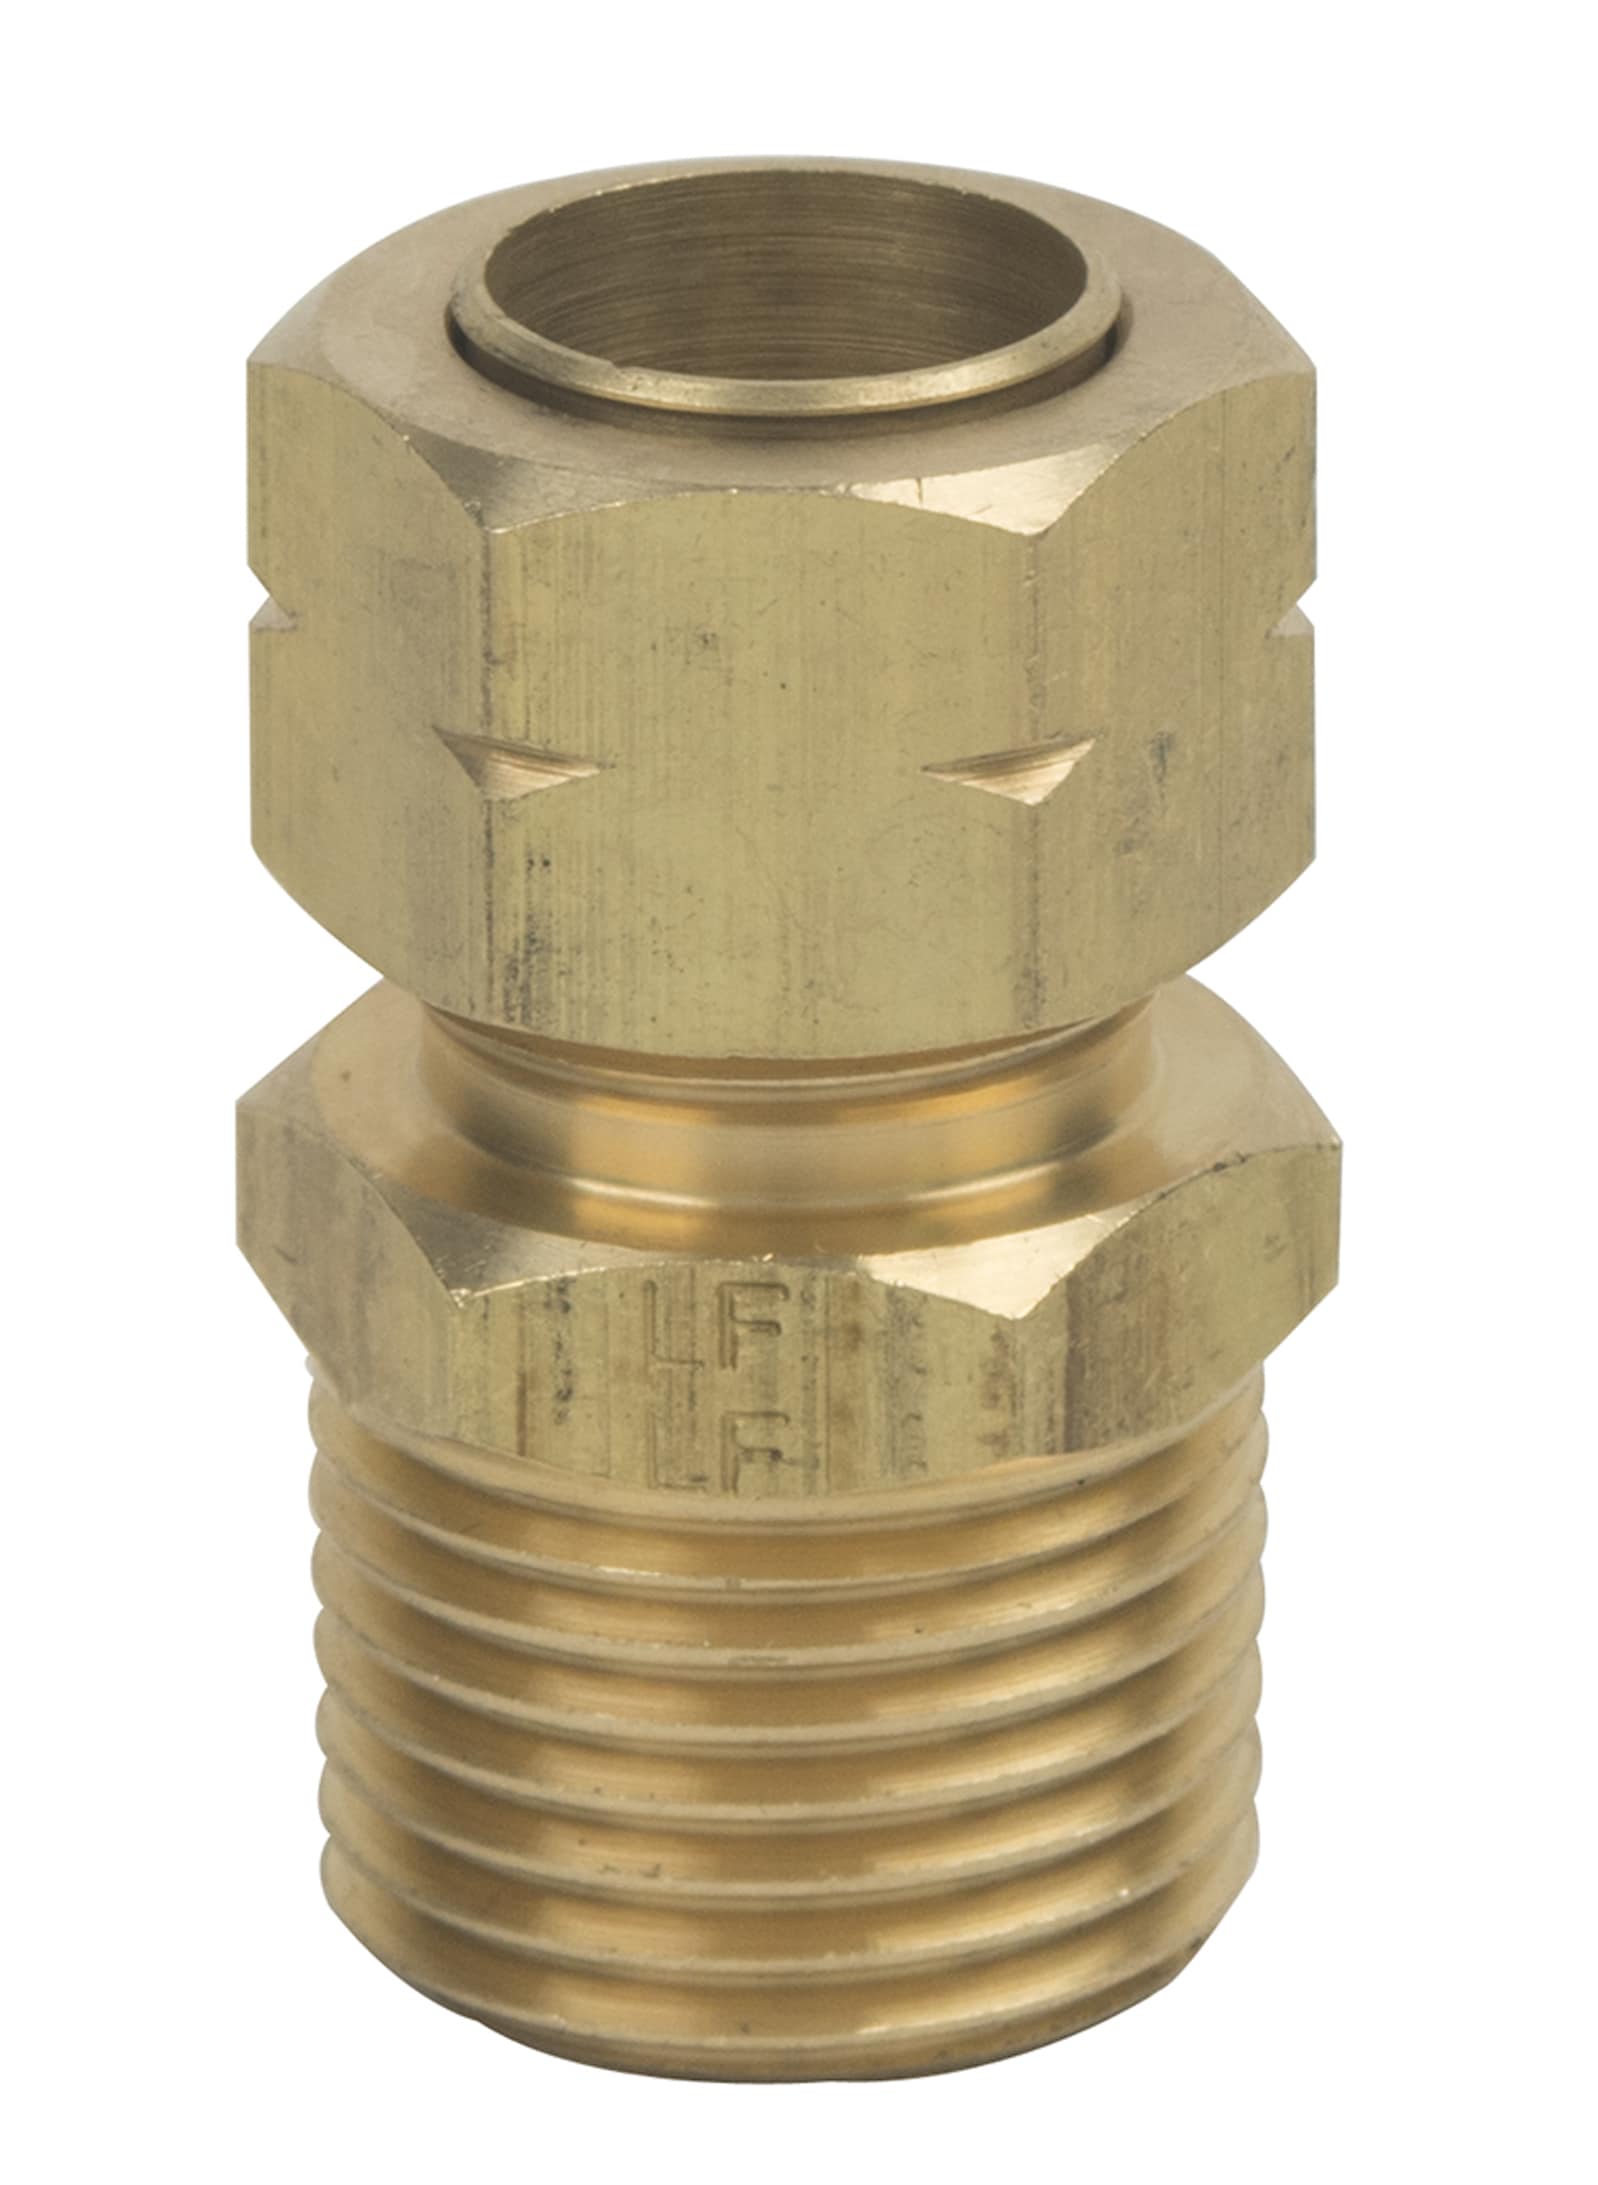 10 New BRASS MALE ADAPTER 1/2” FLARE X 1/2” MIP 